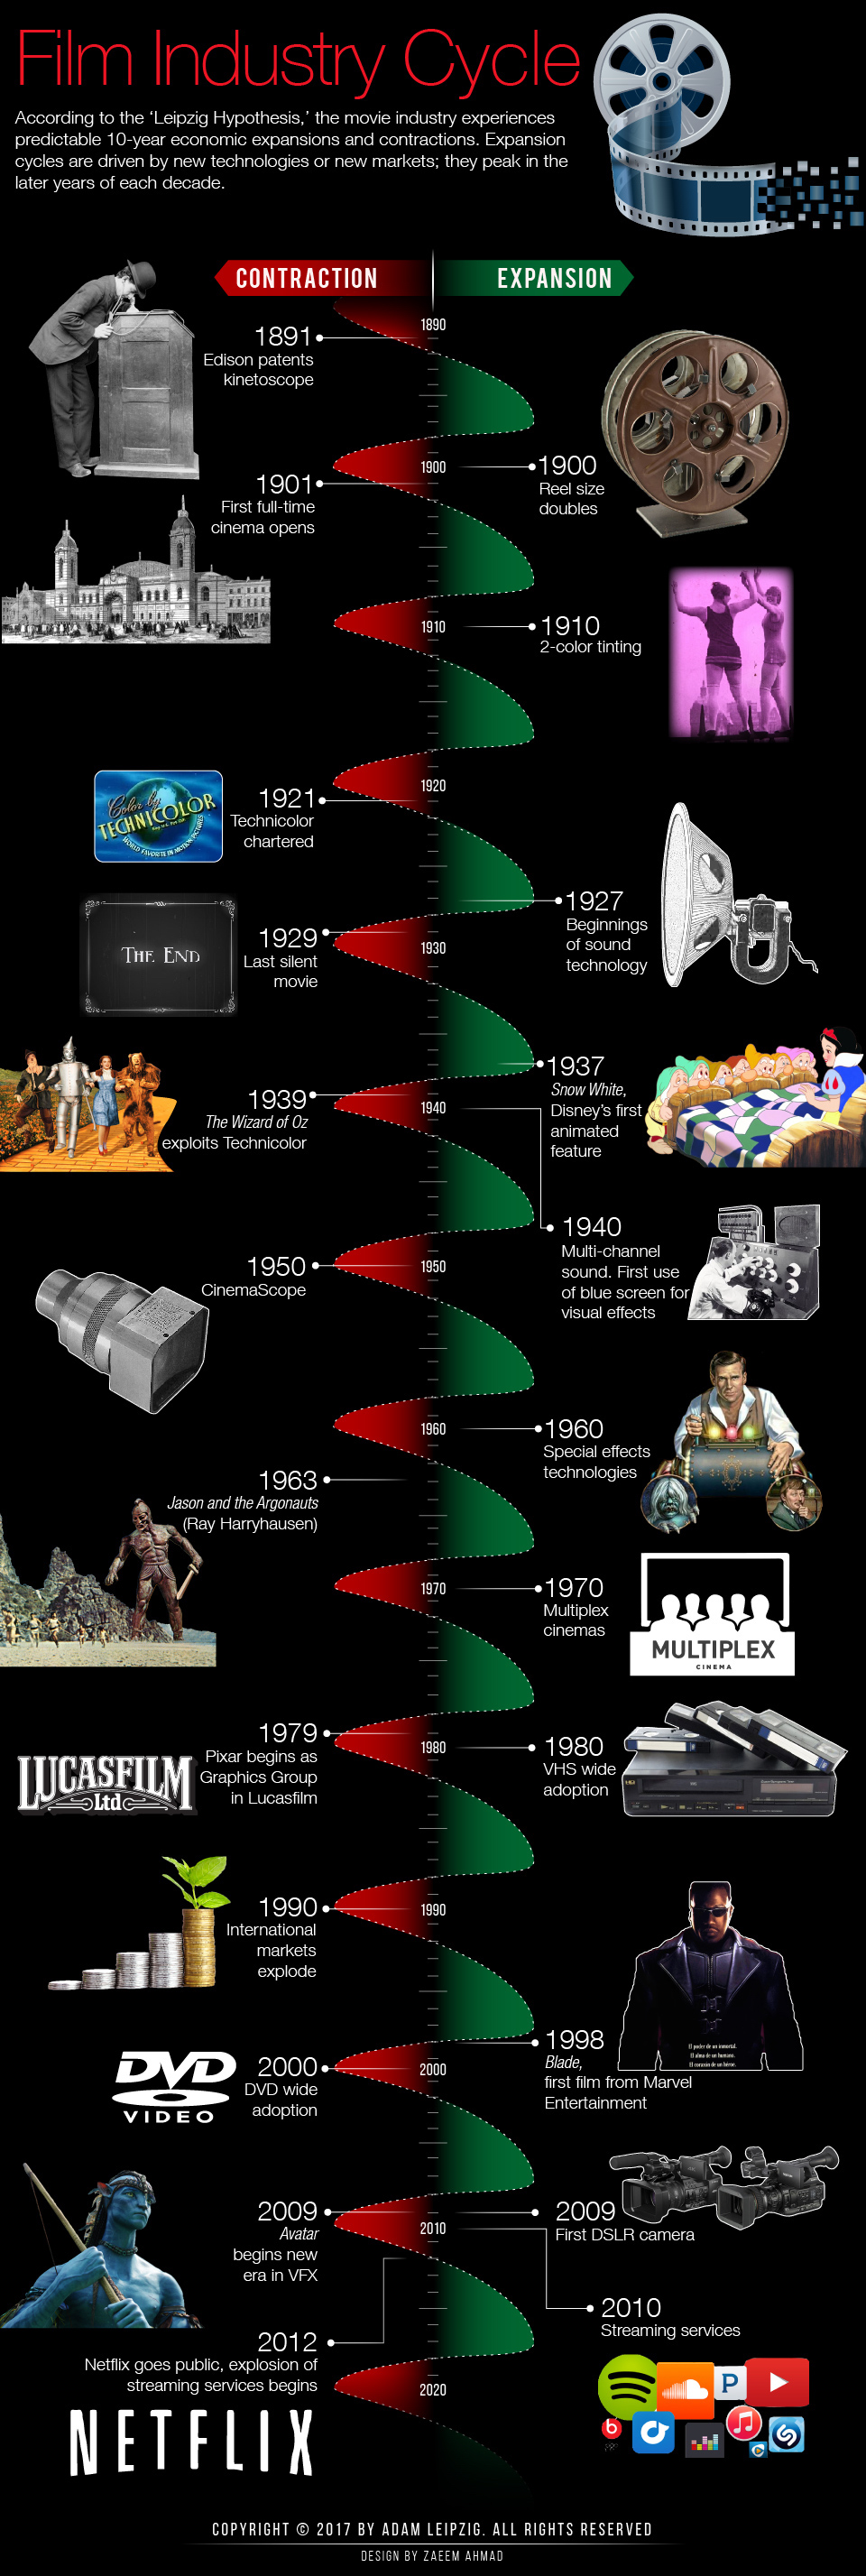 Film Industry Cycle Infographic for 10 years